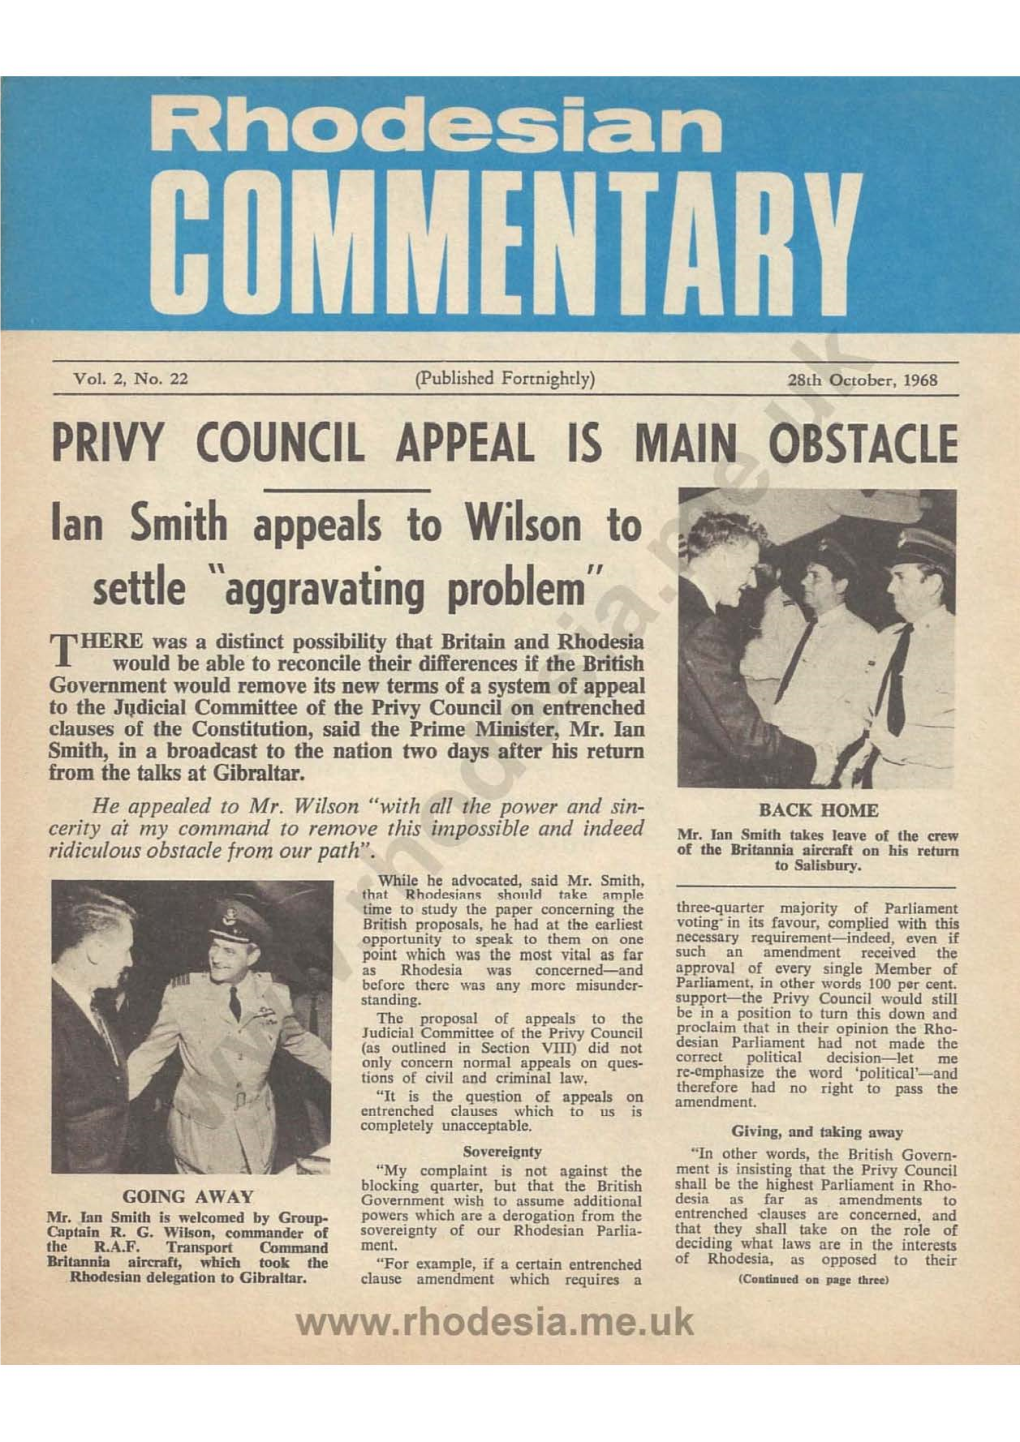 PRIVY COUNCIL APPEAL IS MAIN OBSTACLE Lan Smith Appeals to Wilson to Settle "Aggravating Problem"